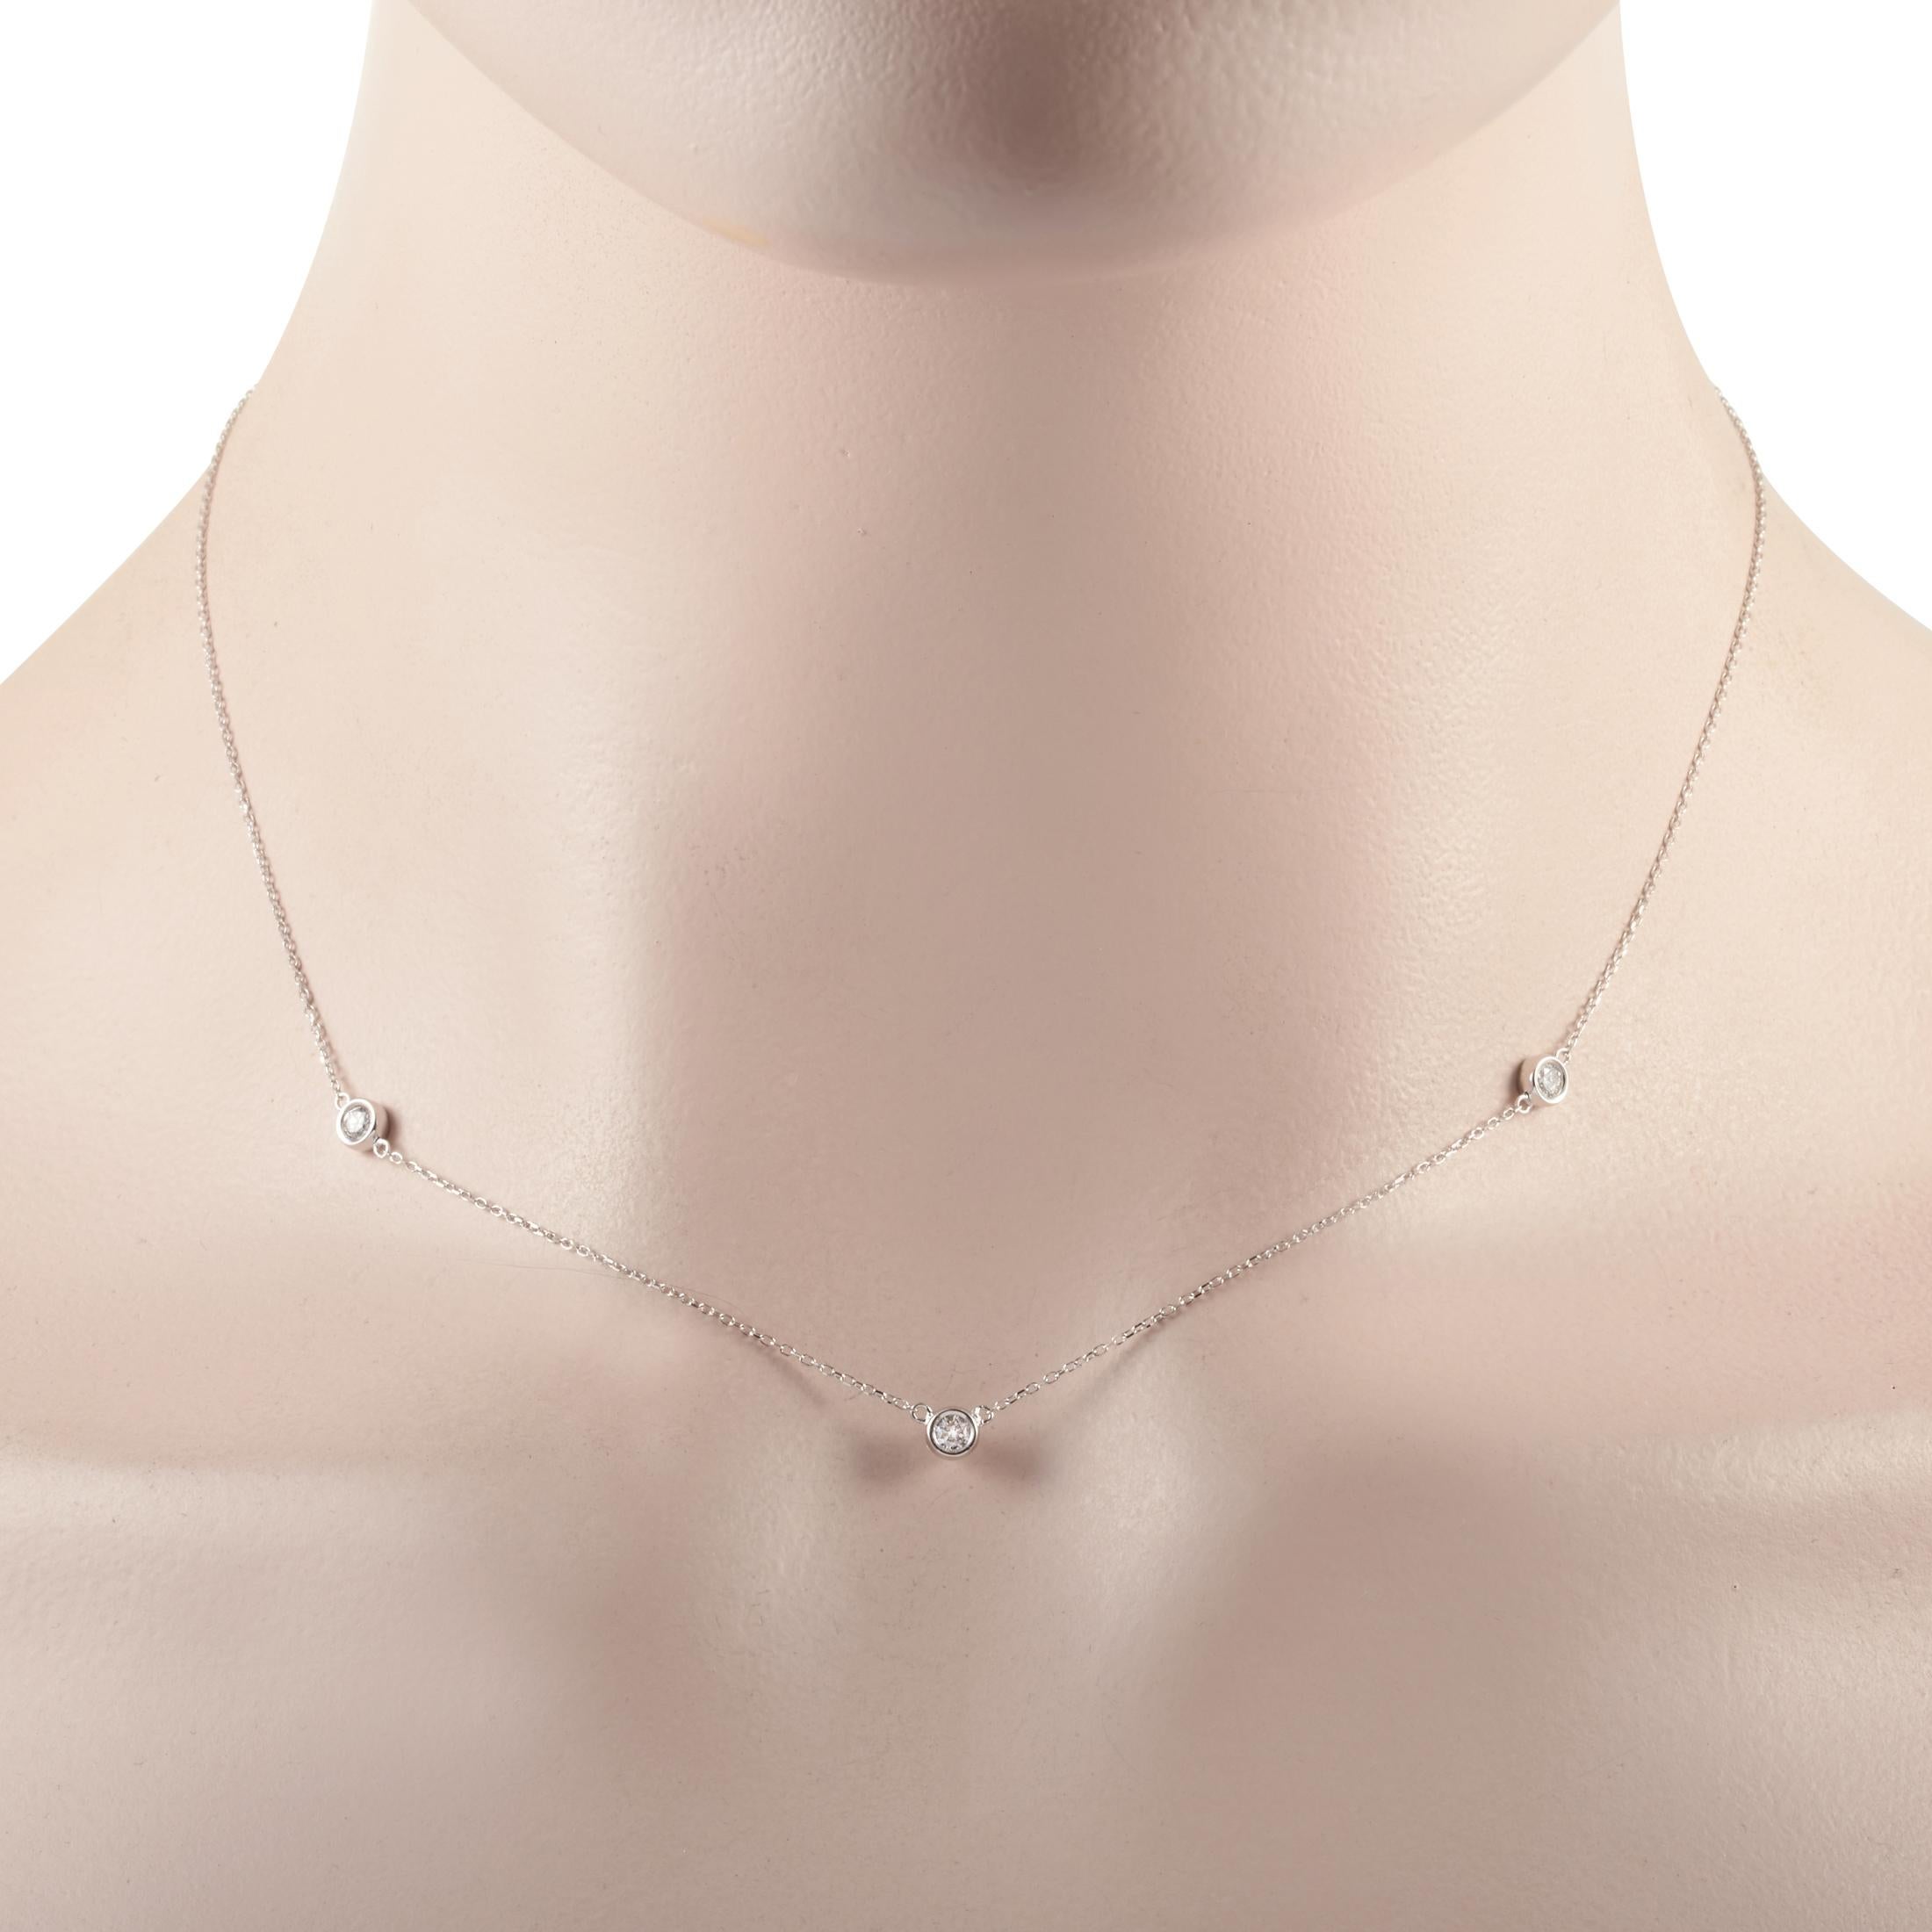 This LB Exclusive necklace is made of 14K white gold and embellished with diamonds that amount to 0.25 carats. The necklace weighs 1.6 grams and measures 16” in length.
 
 Offered in brand new condition, this jewelry piece includes a gift box.